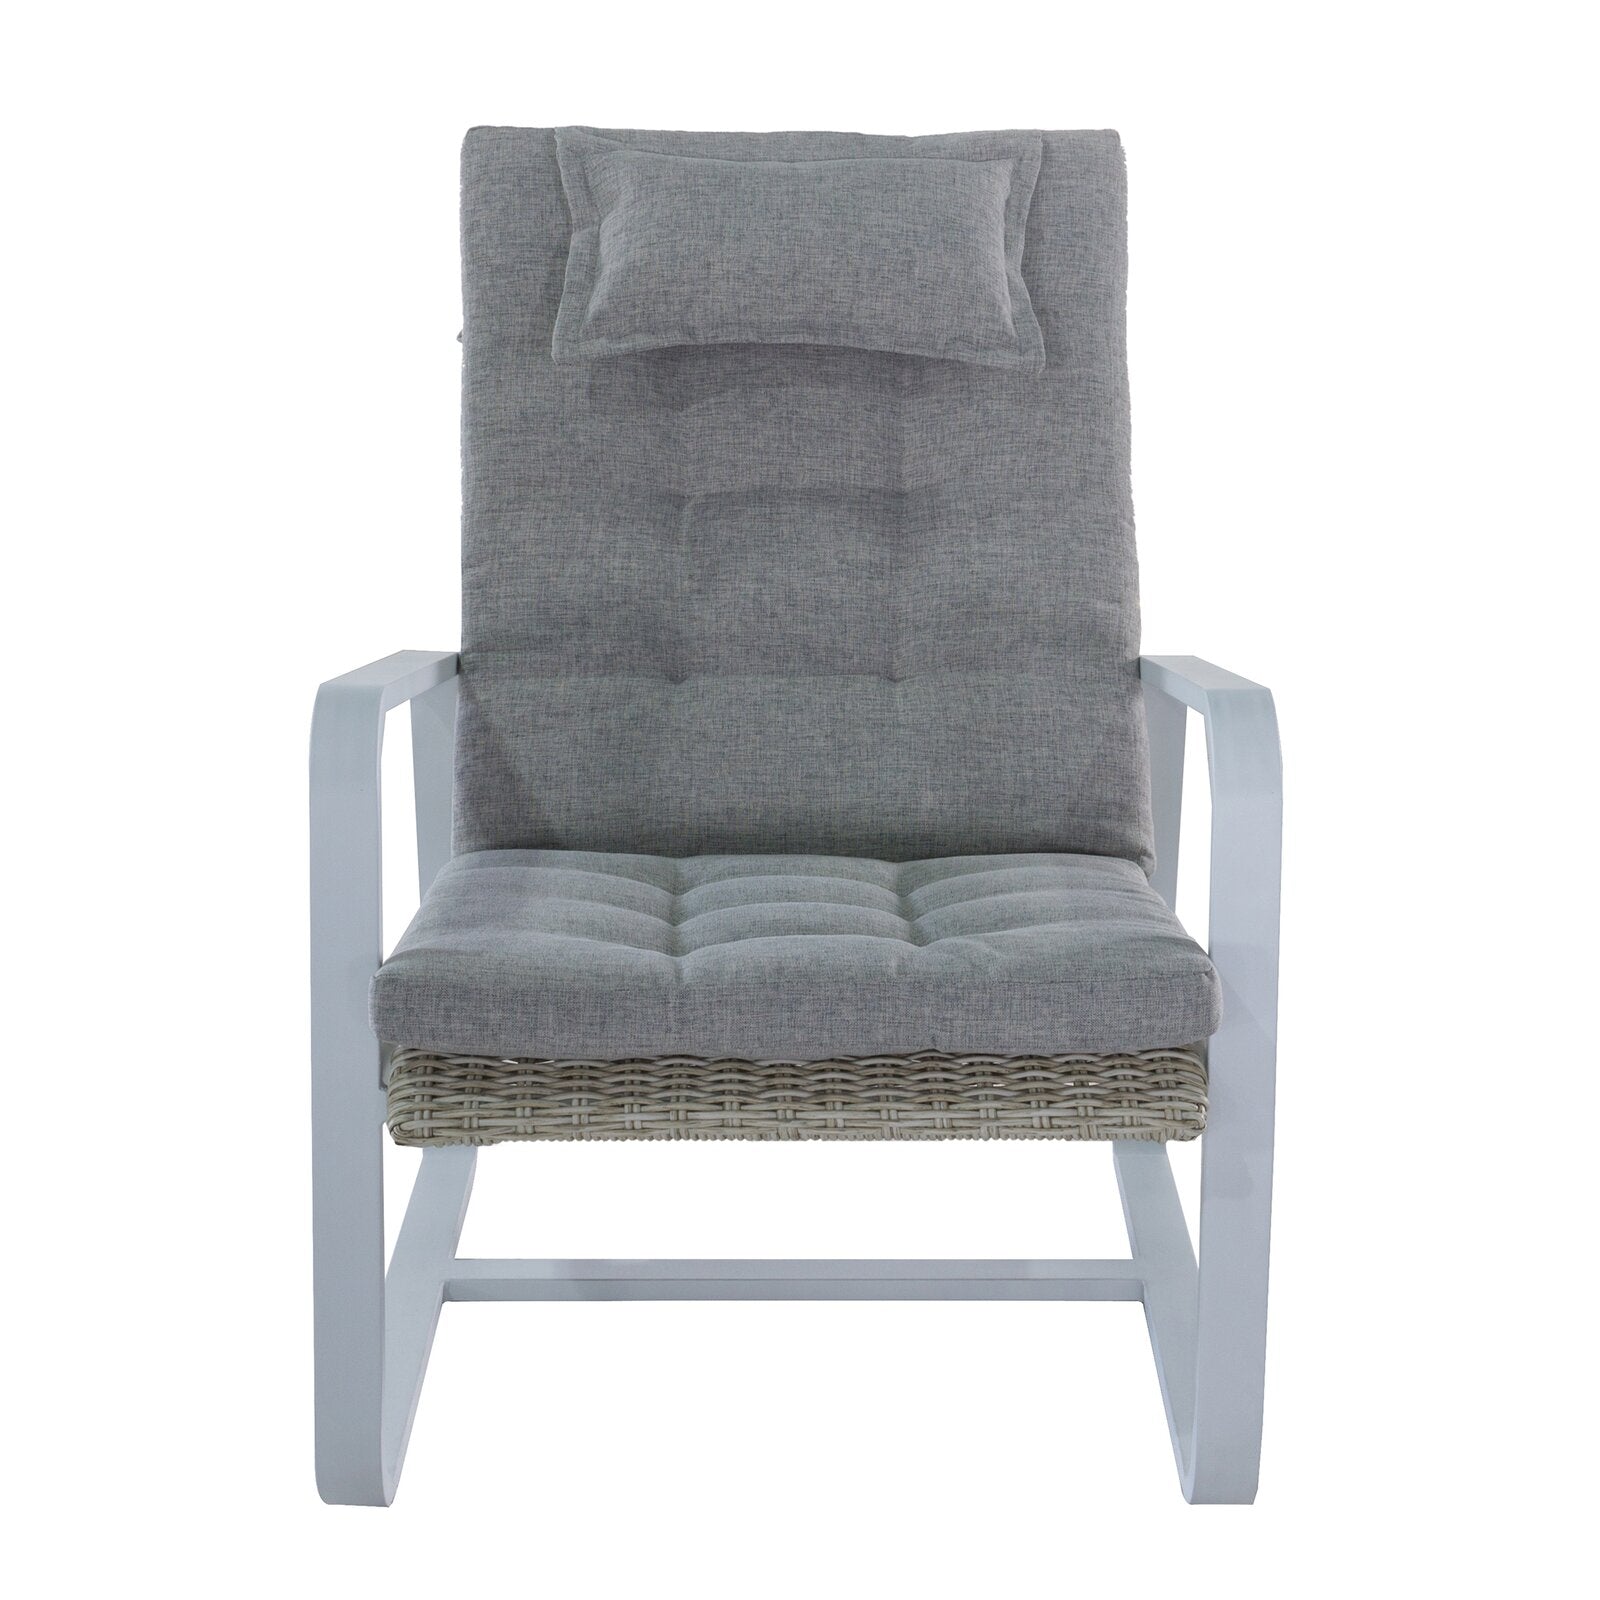 Outdoor Aluminum Frame Reclining Club Chair With Gray Cushion